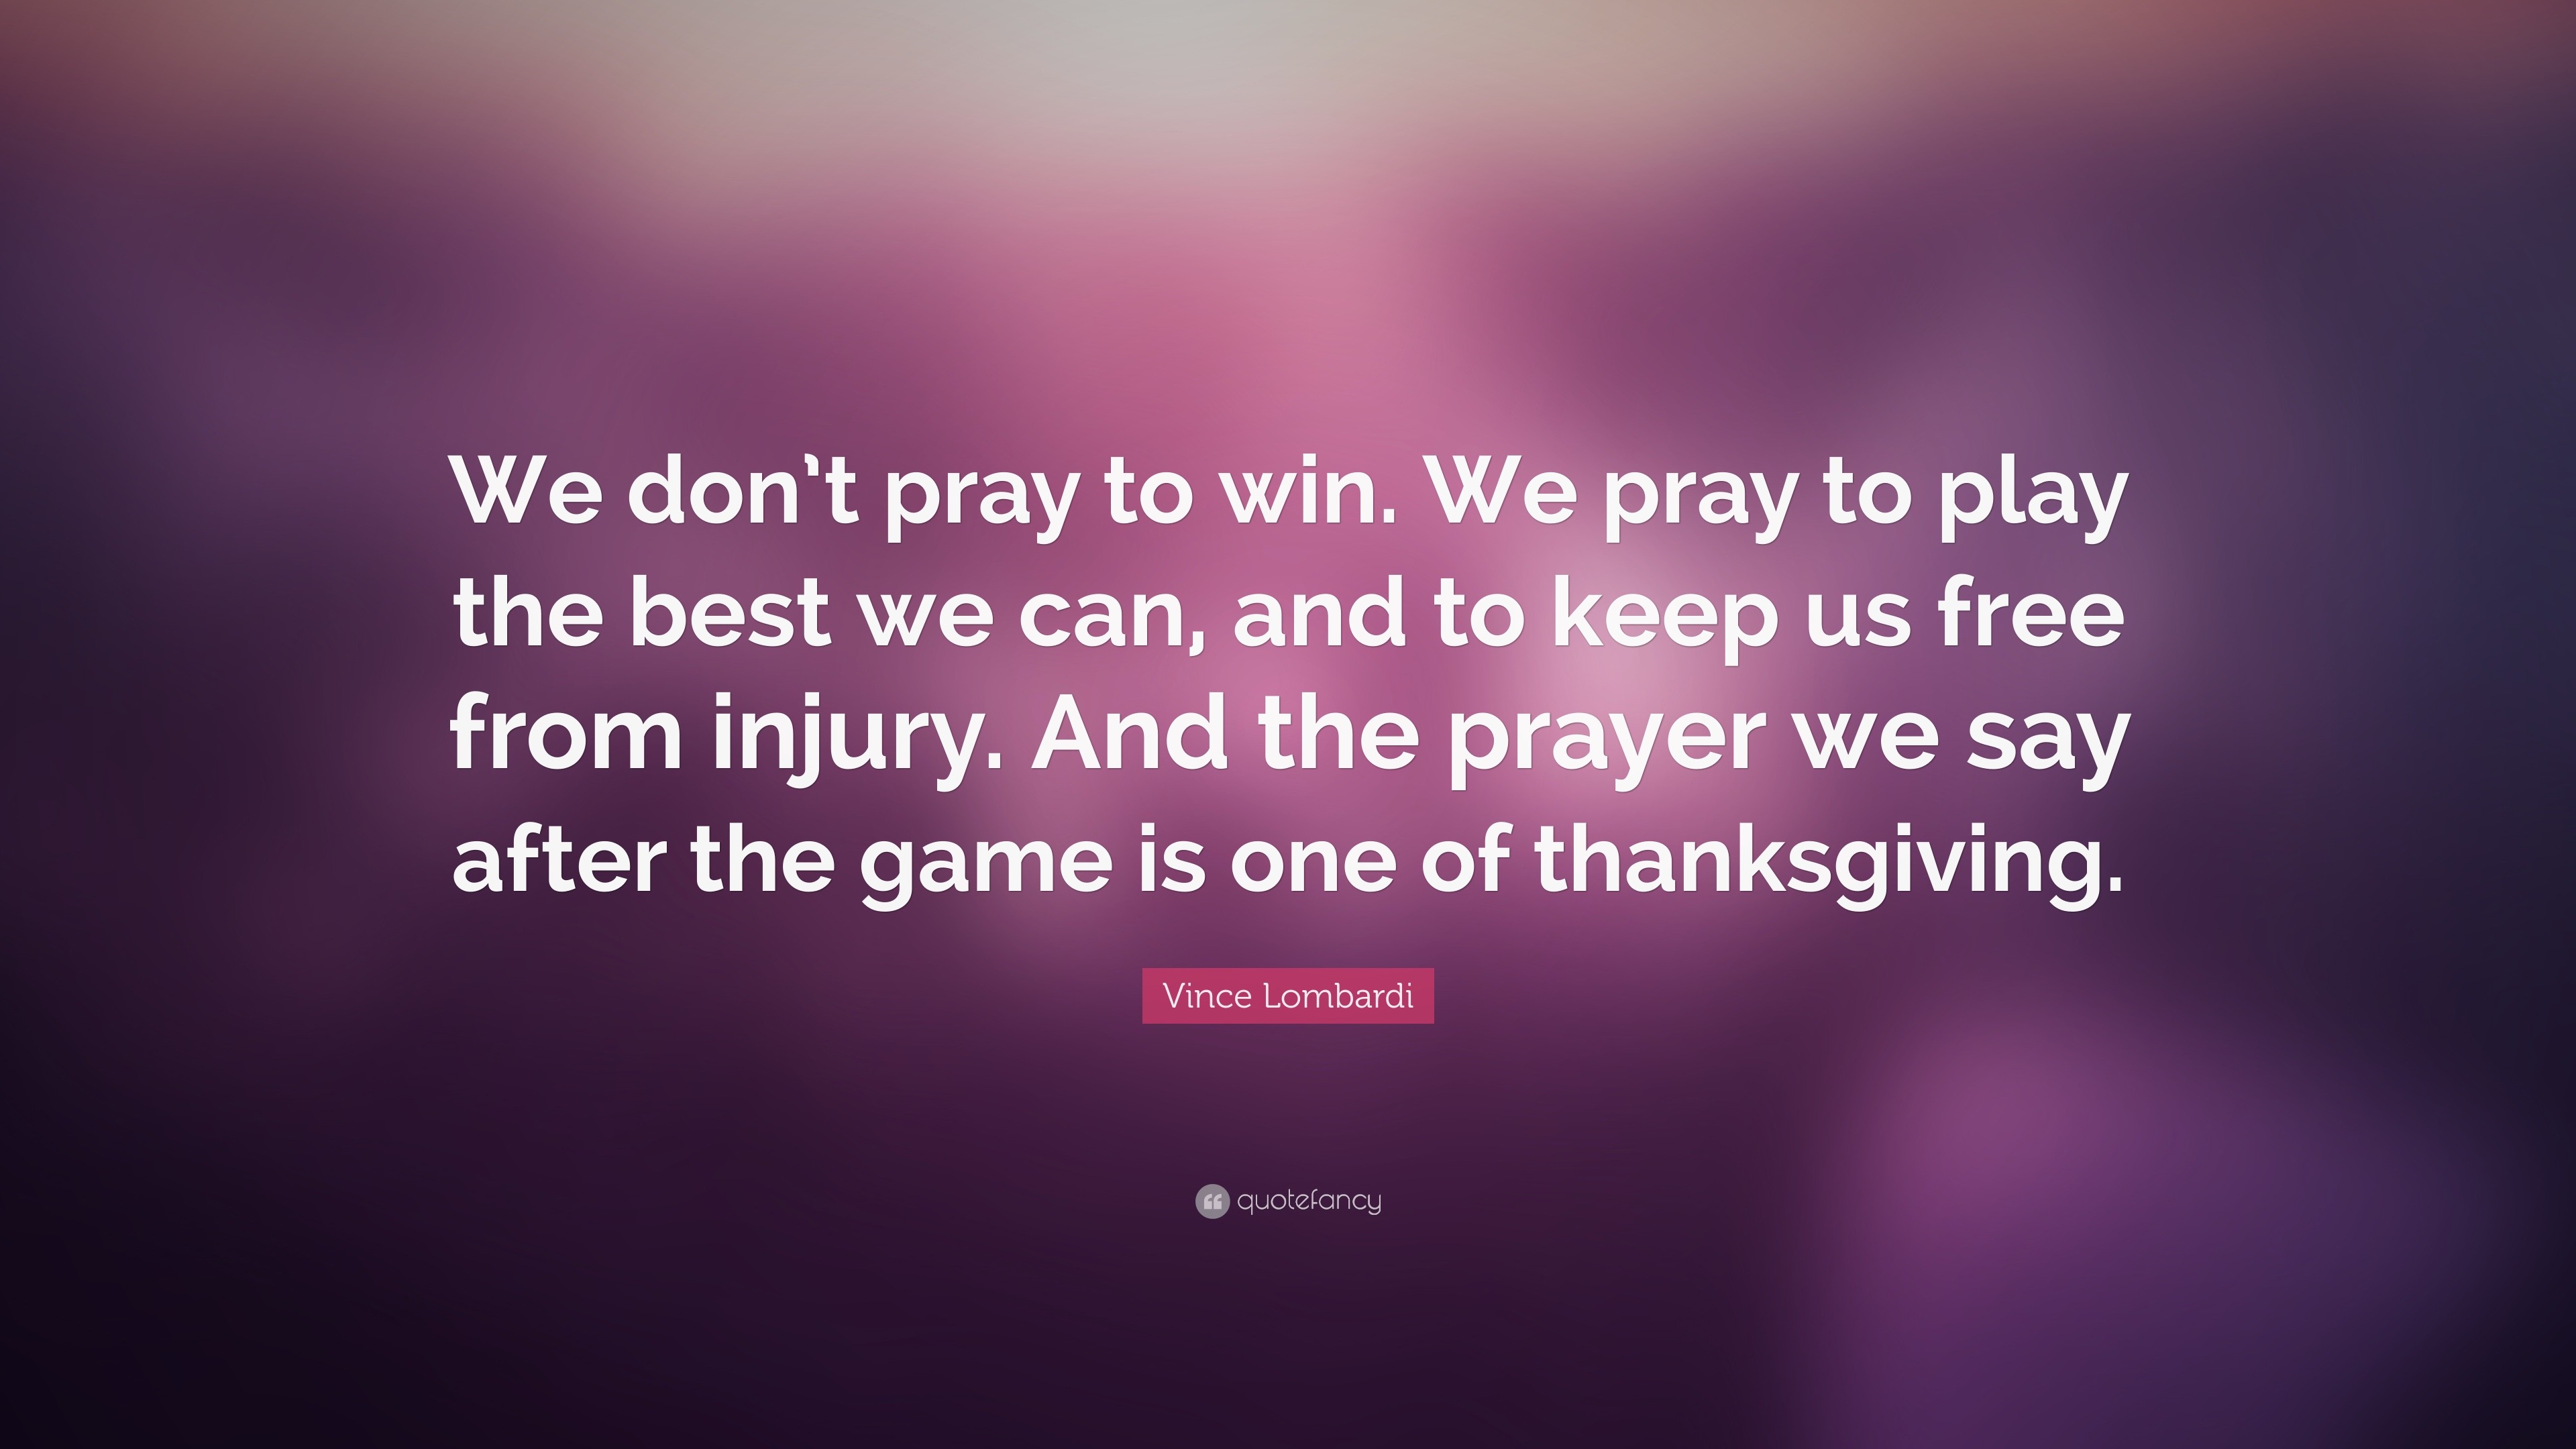 Vince Lombardi Quote “We don t pray to win We pray to